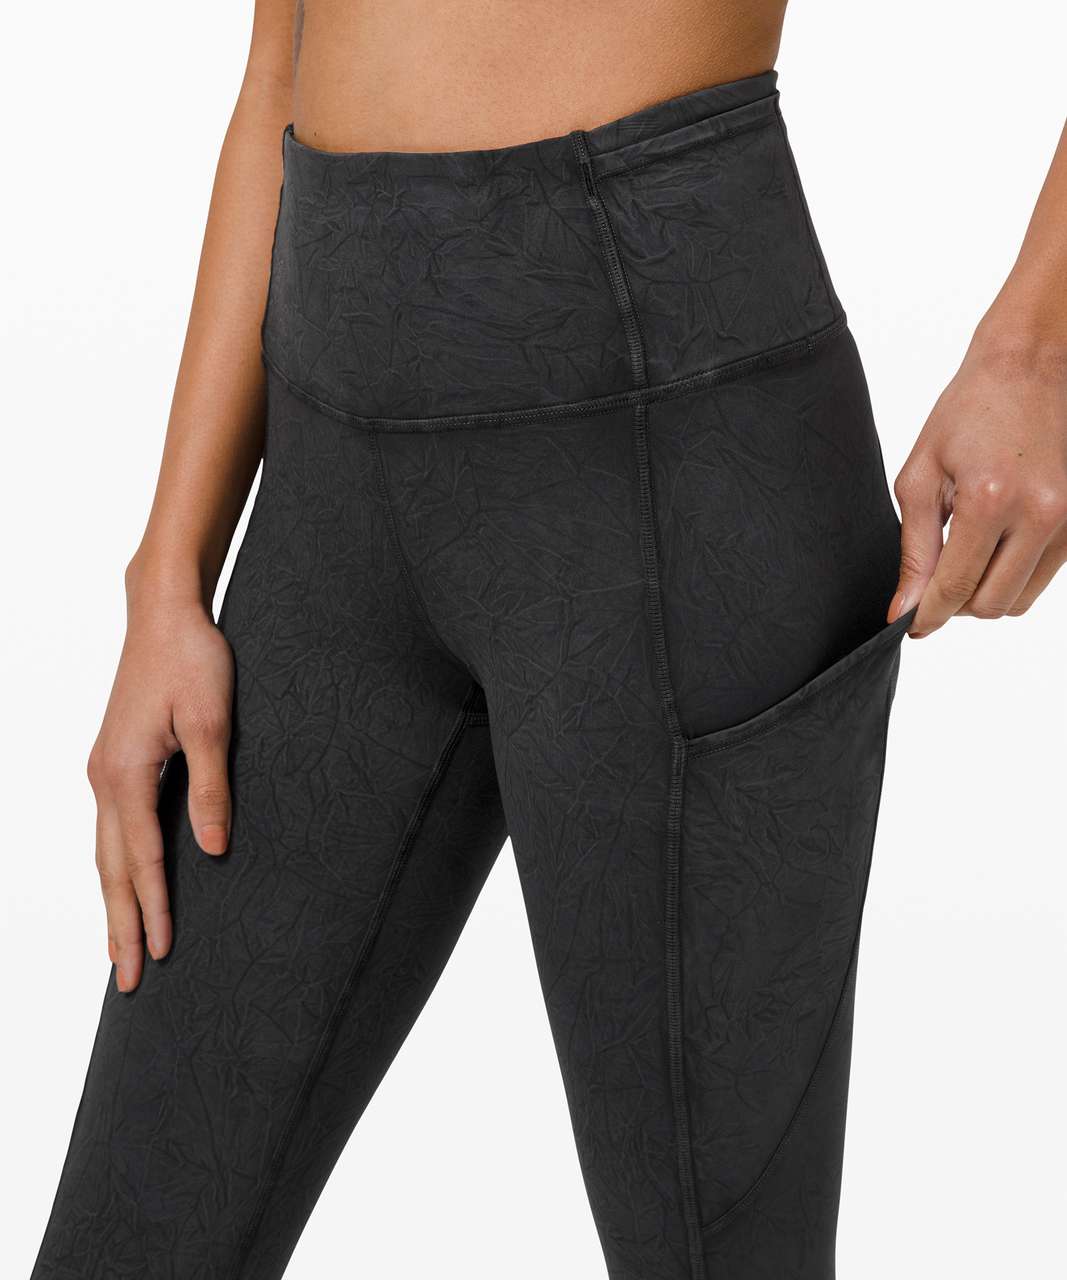 Lululemon Black and White Print with Black Piping and Side Pockets Cropped  Leggings- Size 4 (Inseam 24.75